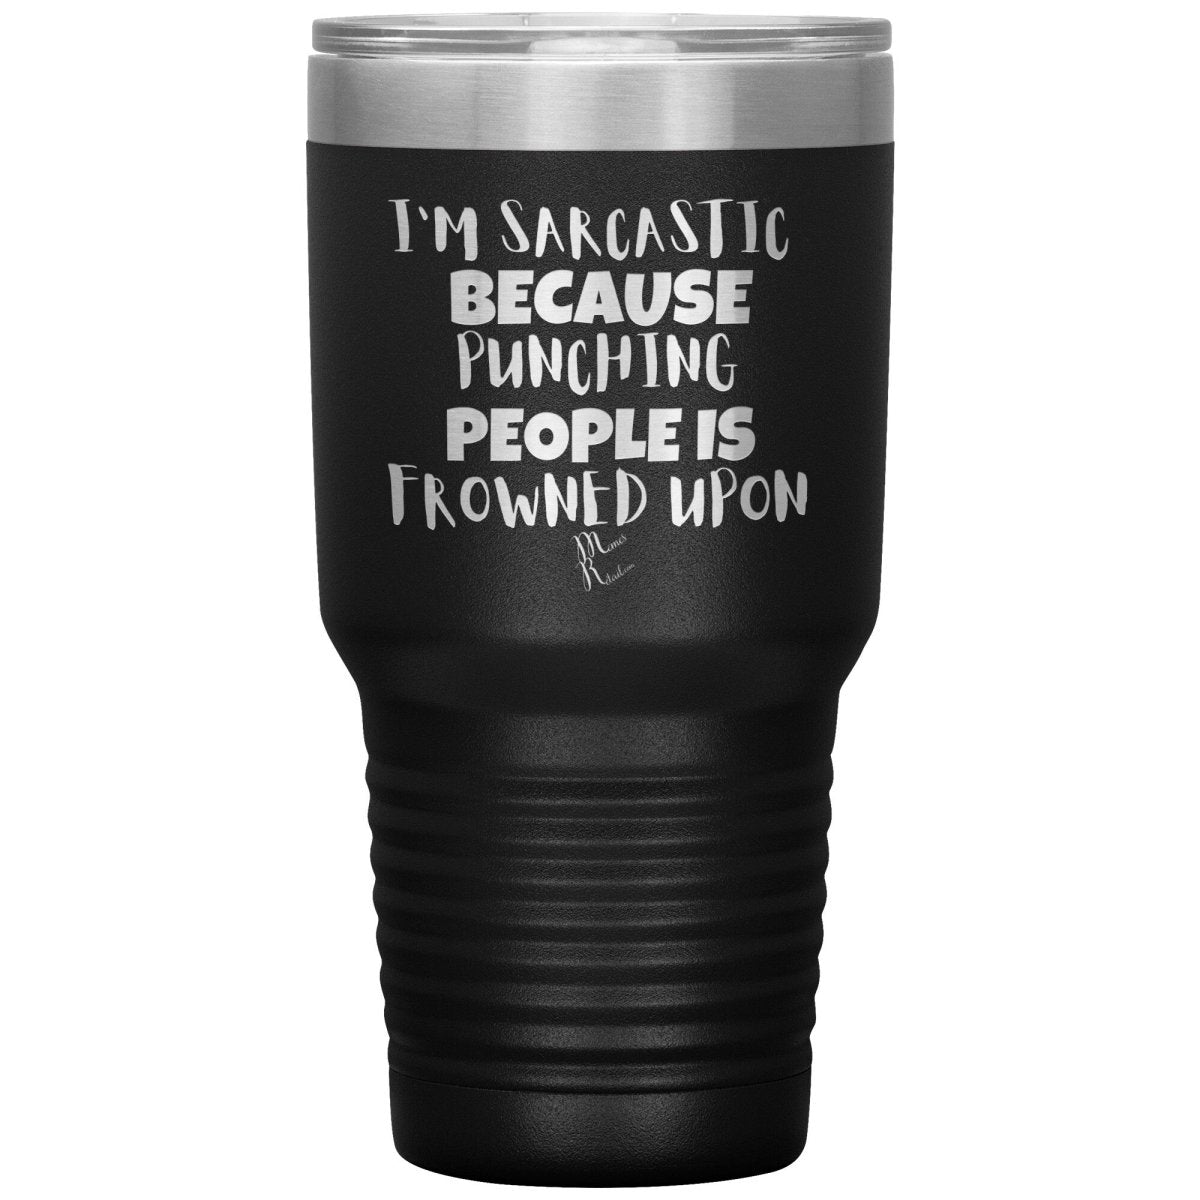 I'm Sarcastic Because Punching People is Frowned Upon Tumblers, 30oz Insulated Tumbler / Black - MemesRetail.com